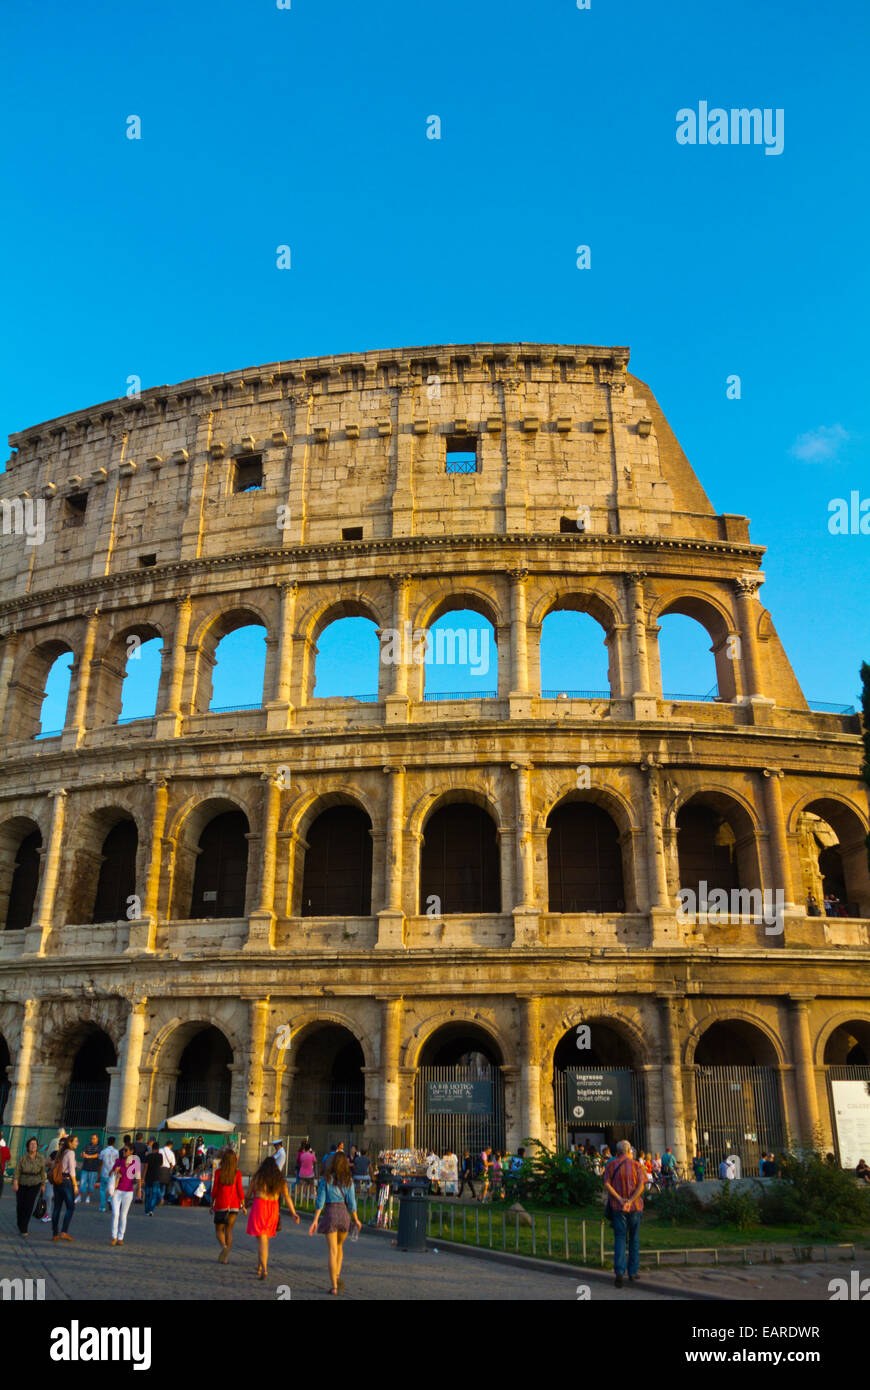 Colosseo, The Colosseum, Rome, Italy Stock Photo